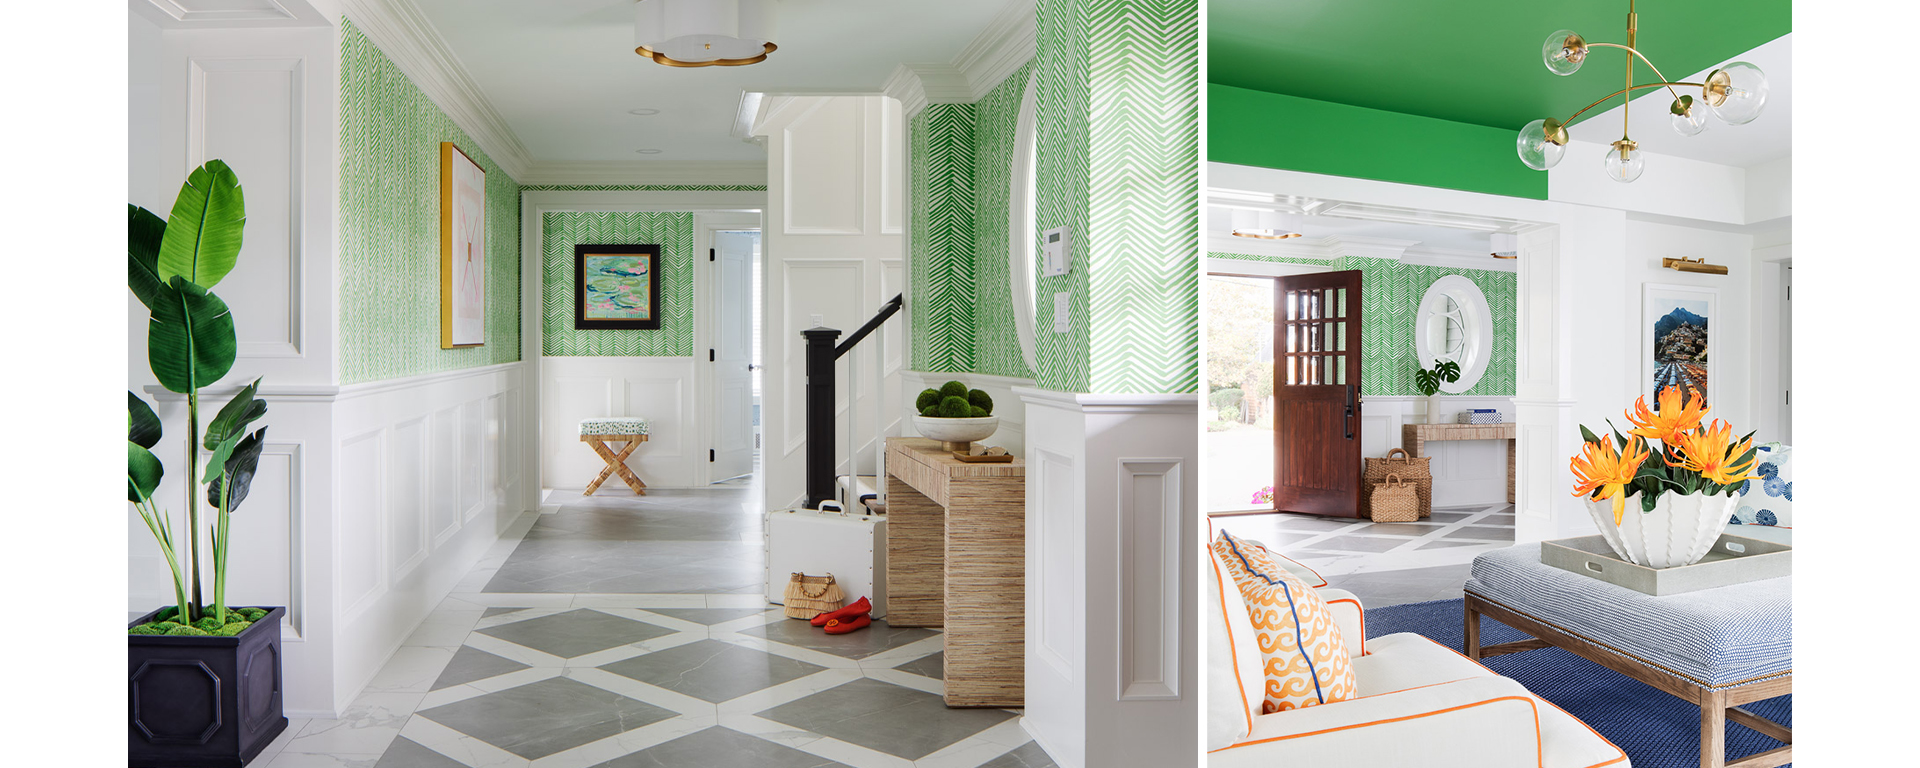 Left imag): Home entry and corridor with gray and white diamond-patterned tile, green and white patterned wallpaper above white wainscoting, modern accent table, and potted palm in foreground, Right image: Living room with blue rug and green ceiling, plush chair and ottoman in foreground with oversize floral arrangement on a tray and dark wood front door in background.